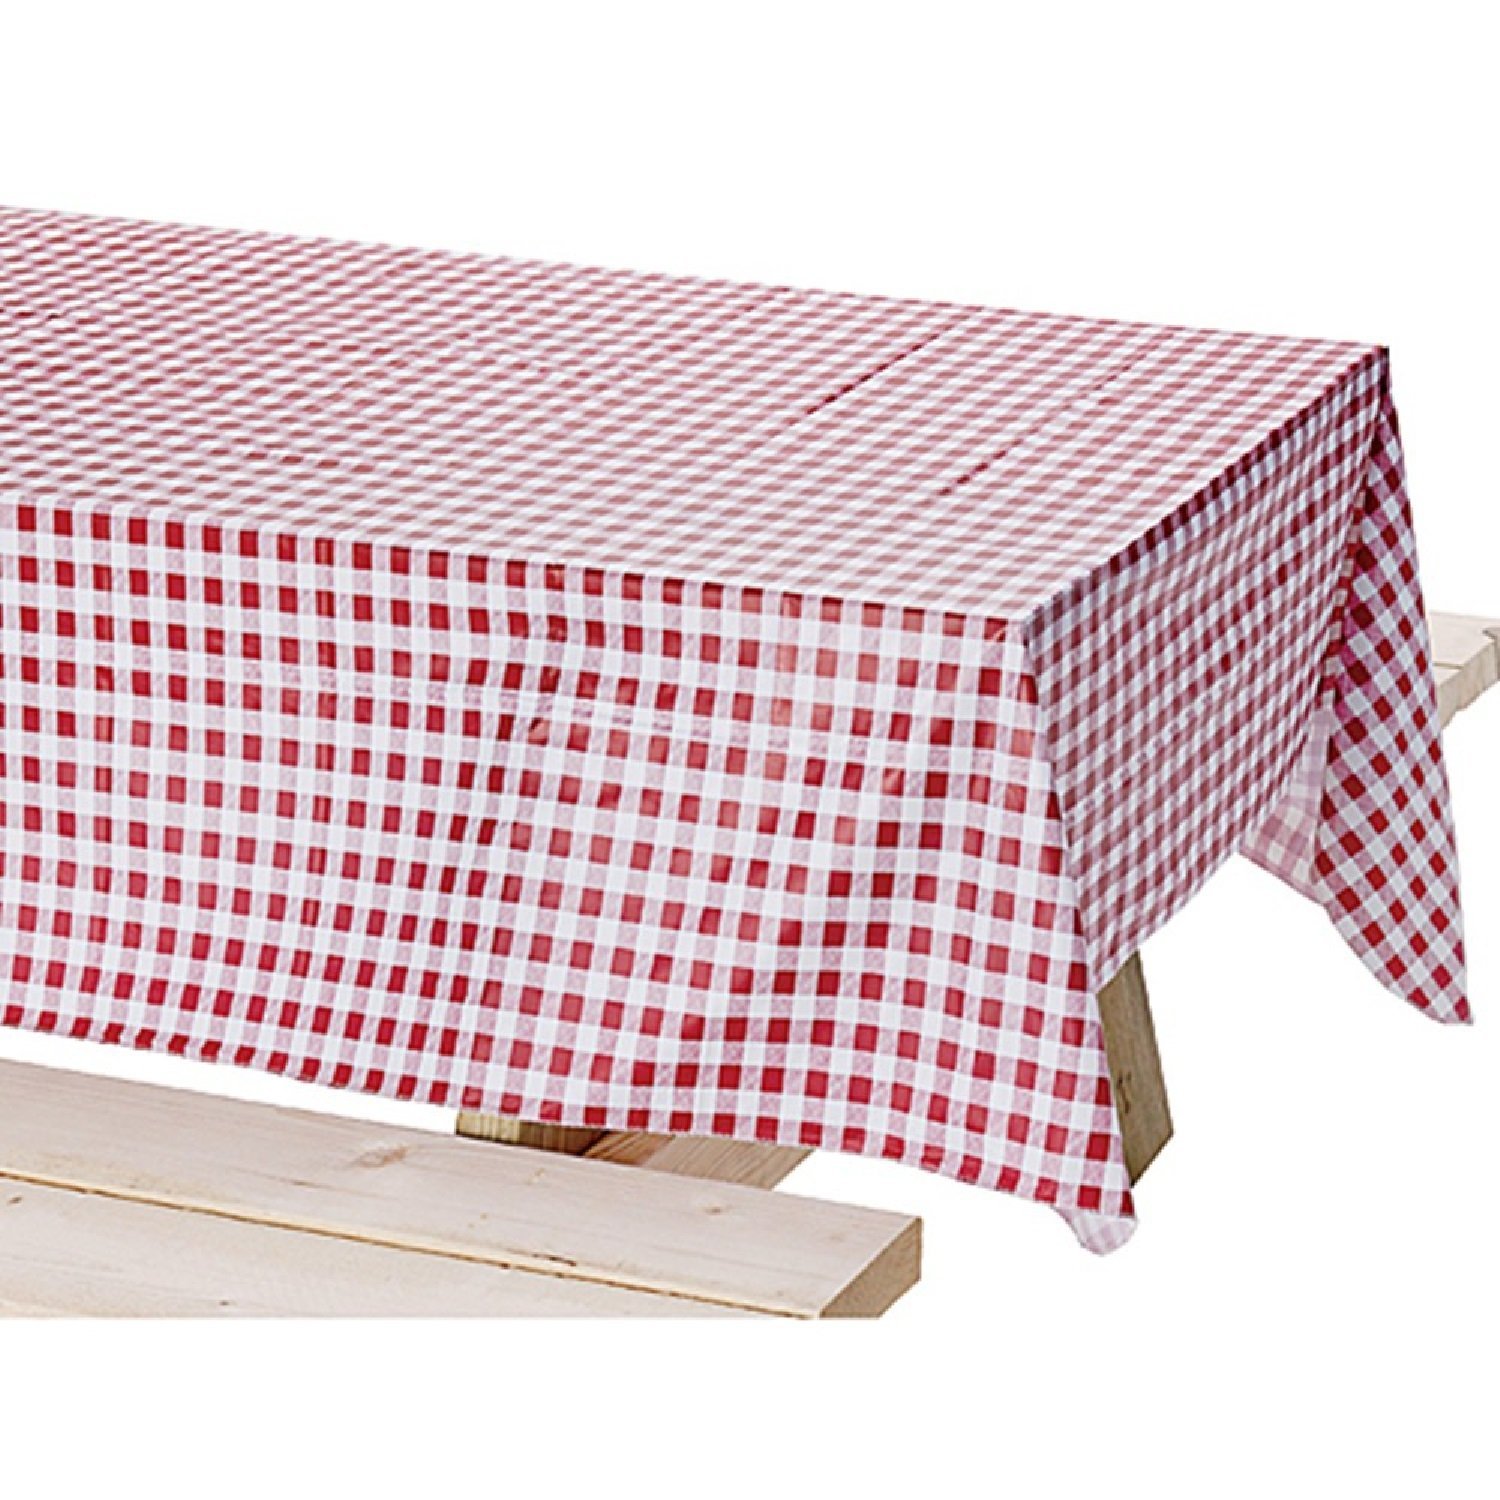 Coleman Vinyl Table Cloth (54″x84″) Only $2.97 on Amazon! (Add-on Item!)